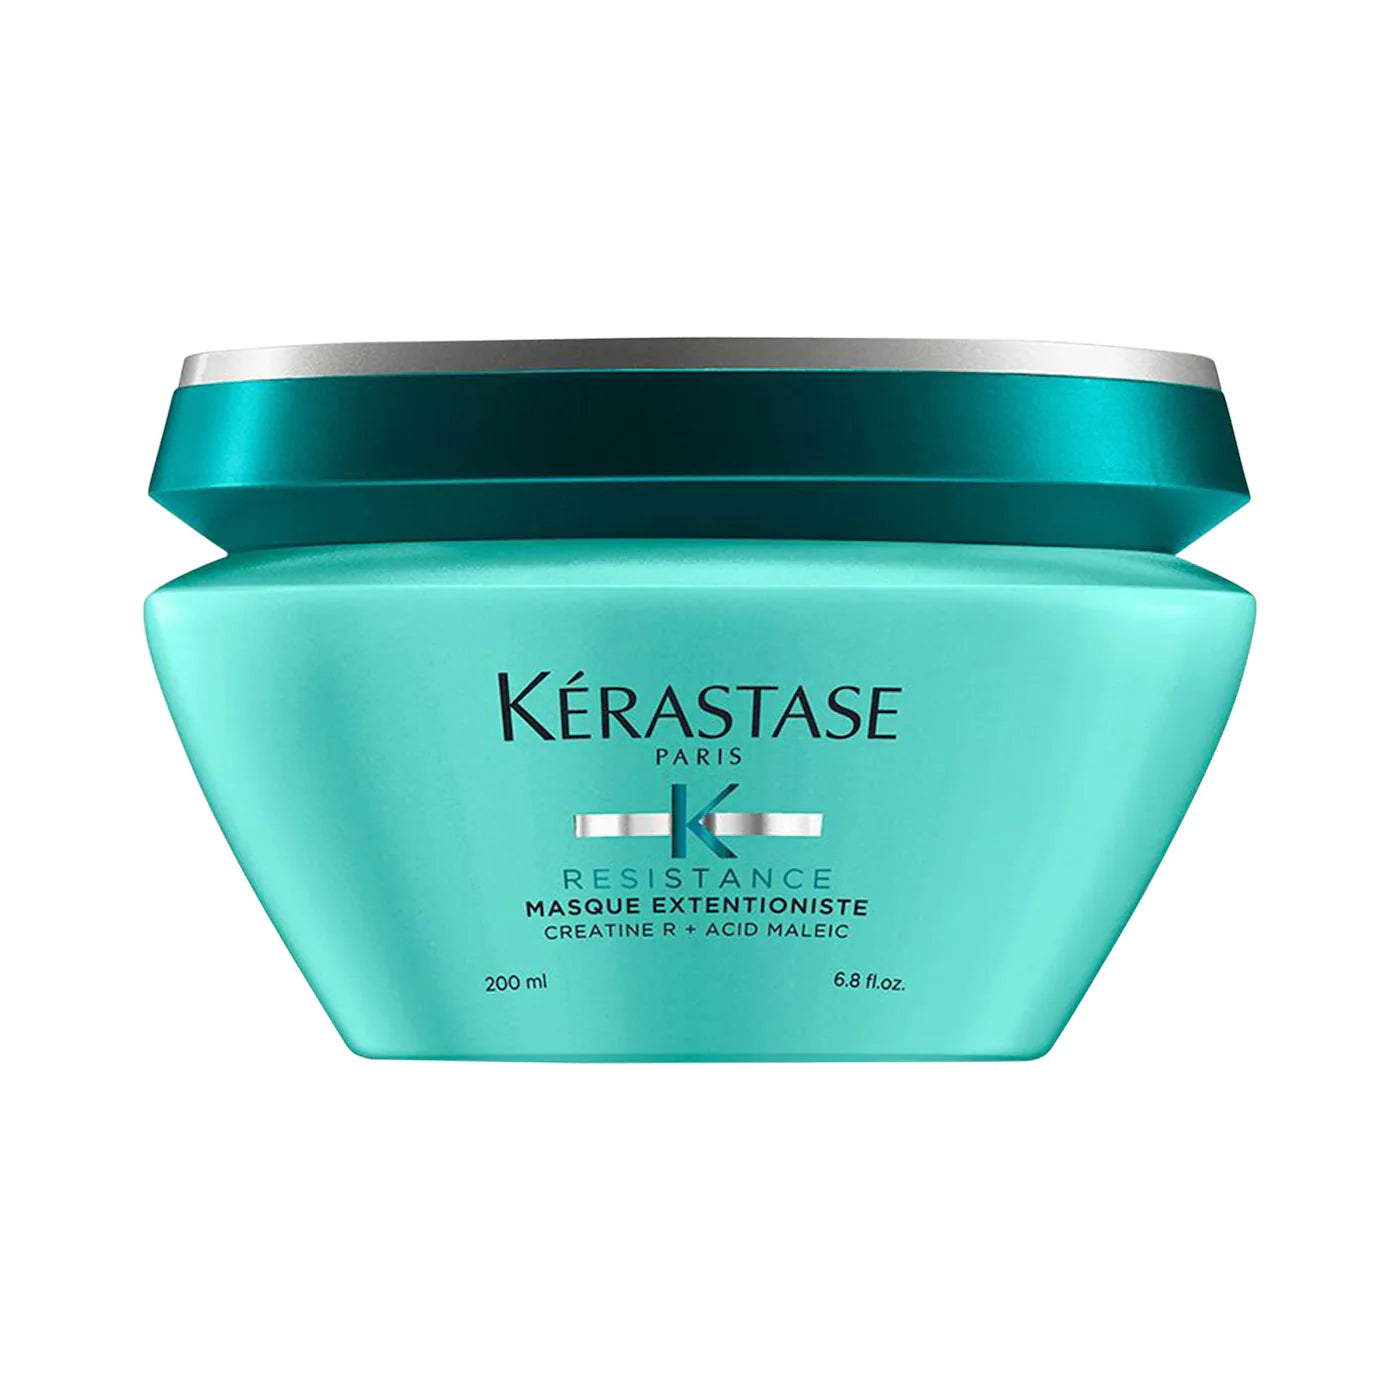 RESISTANCE Masque Extentioniste Hair Mask